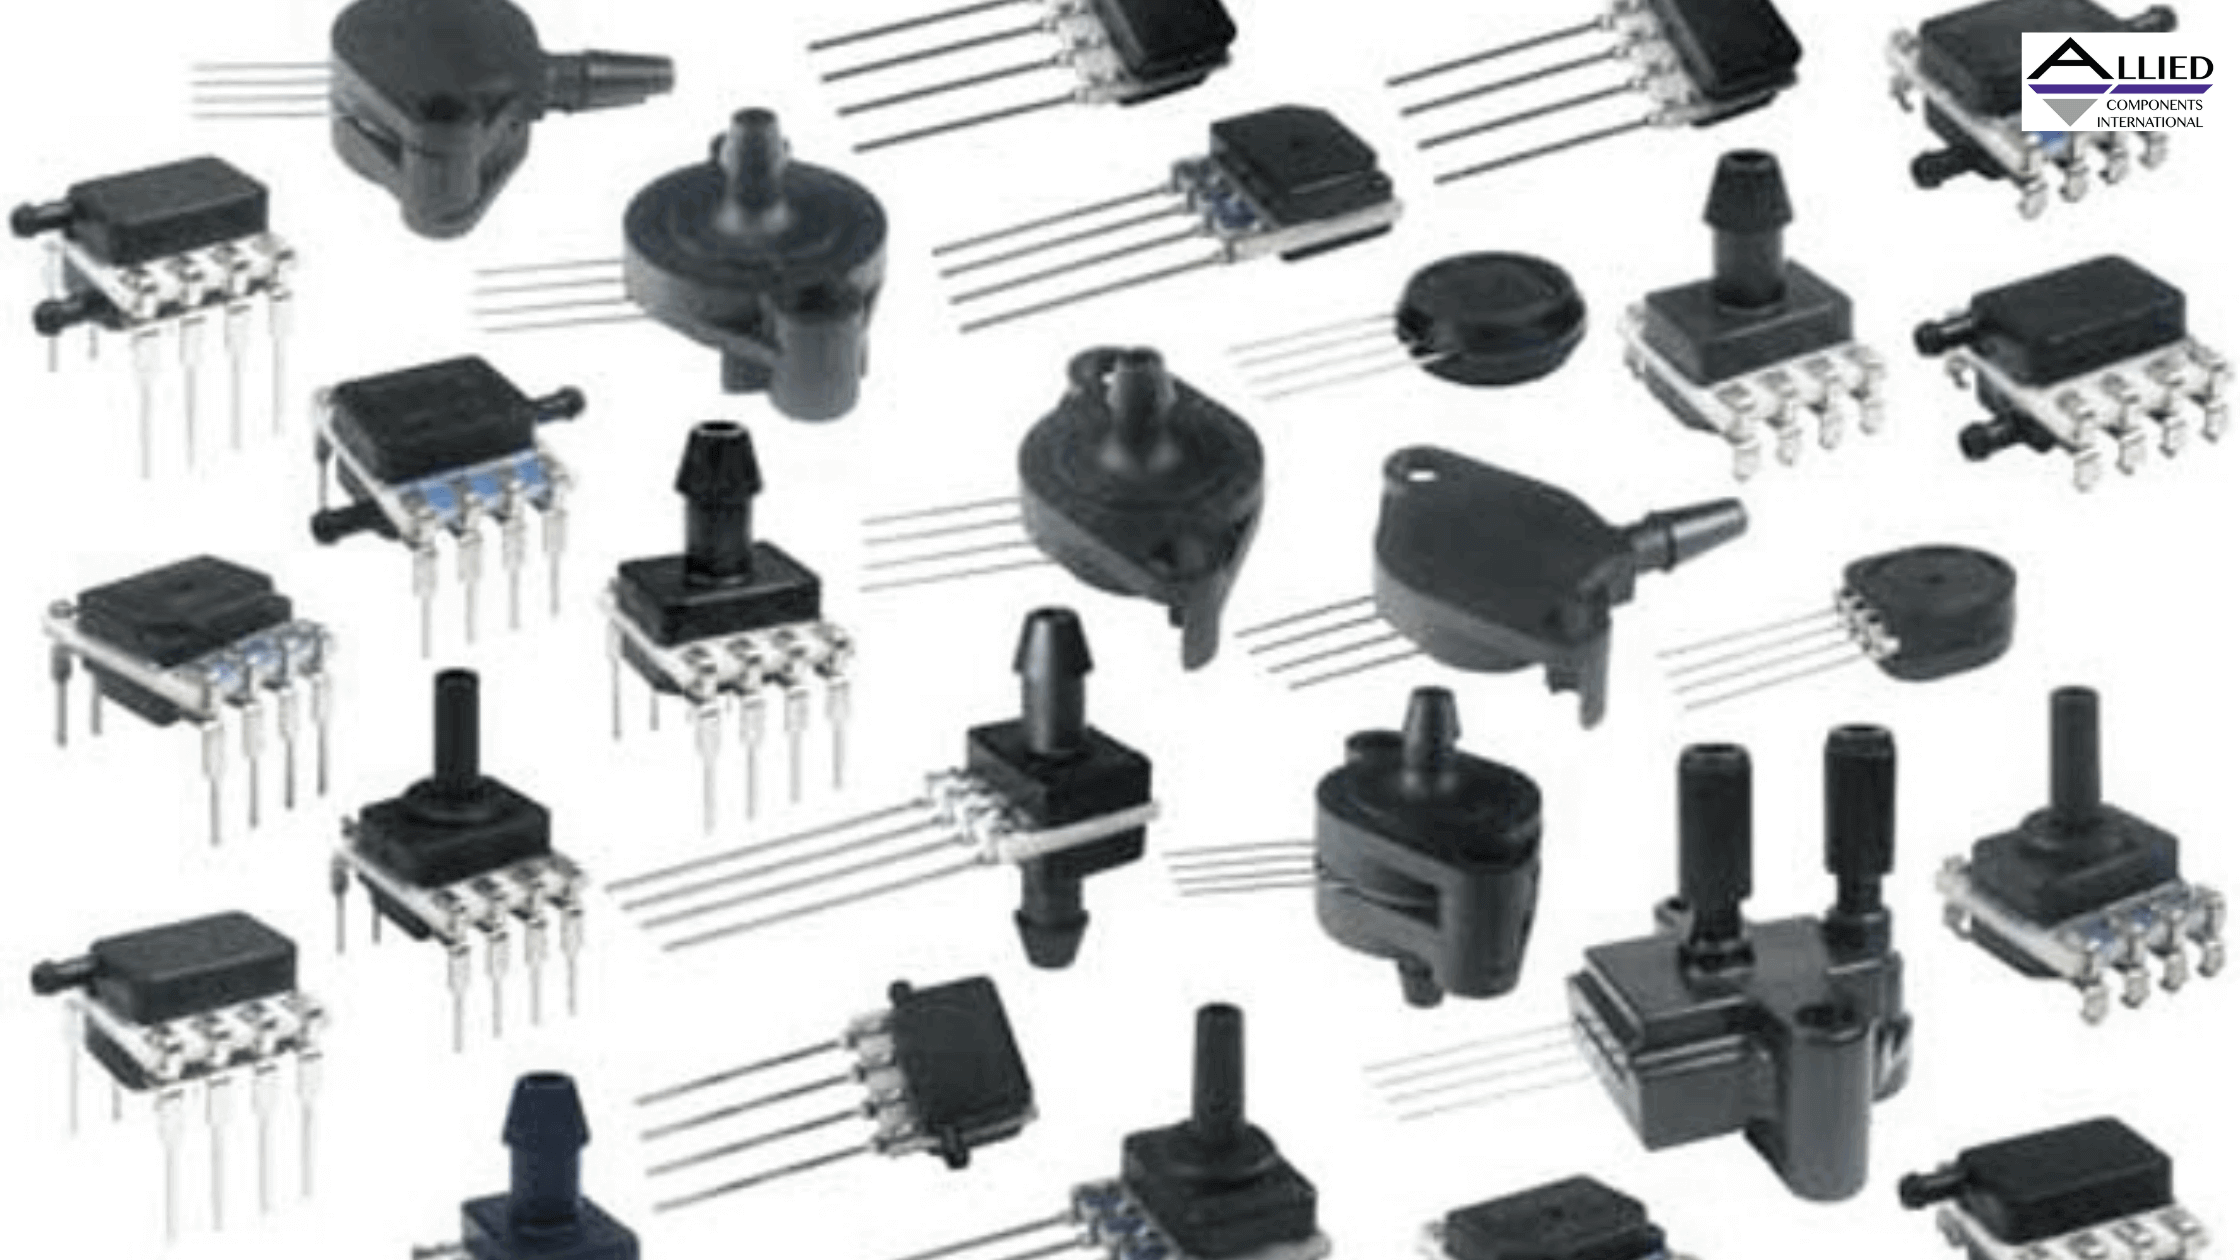 How to Select High-Accuracy Ultra-Low Pressure Sensors